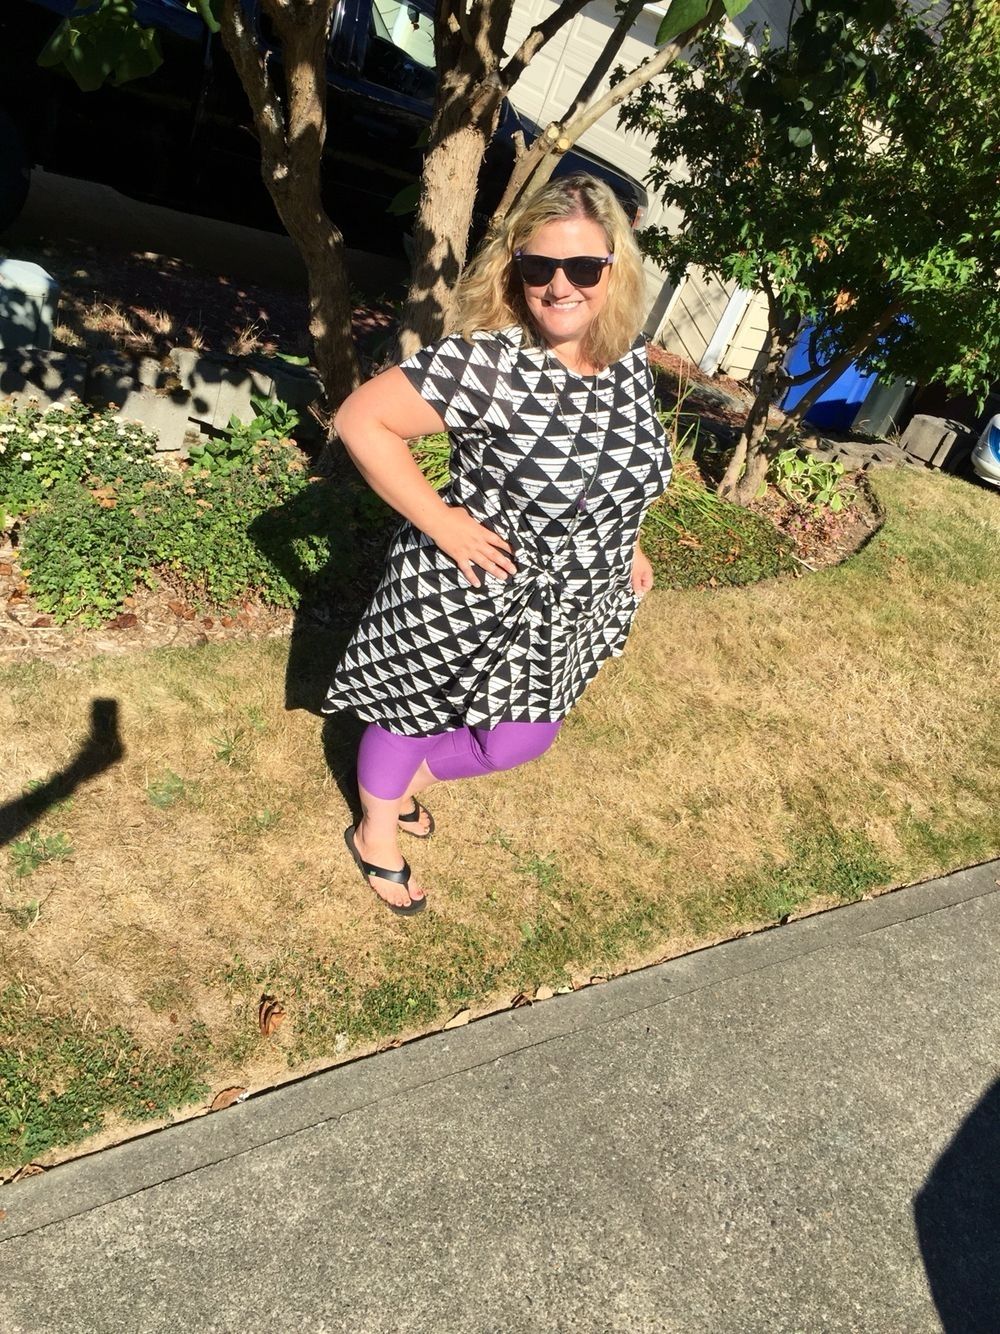 Lularoe Black And White Triangle Carly And Purple Leggings Within Newest Carly Triangle Tables (View 7 of 20)